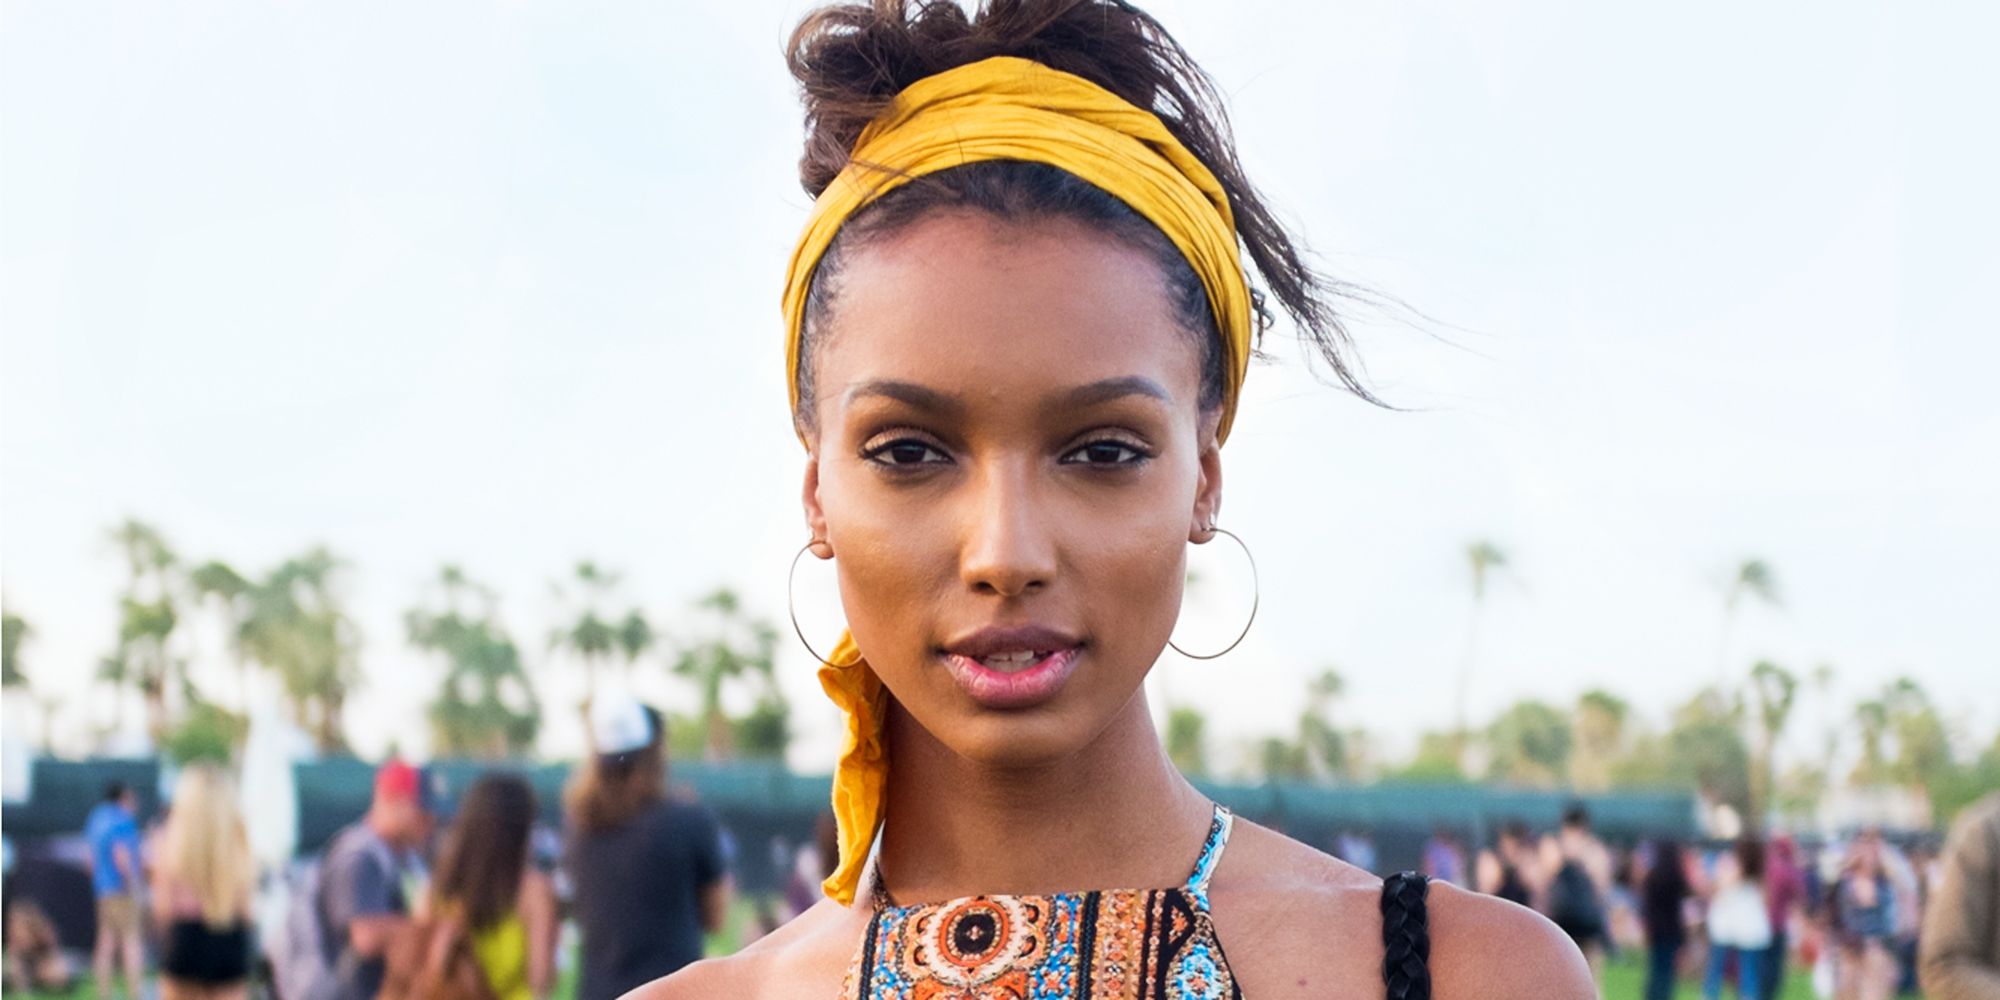 The 20 Best Ombré Box Braid Ideas For Your Next Hair Appointment